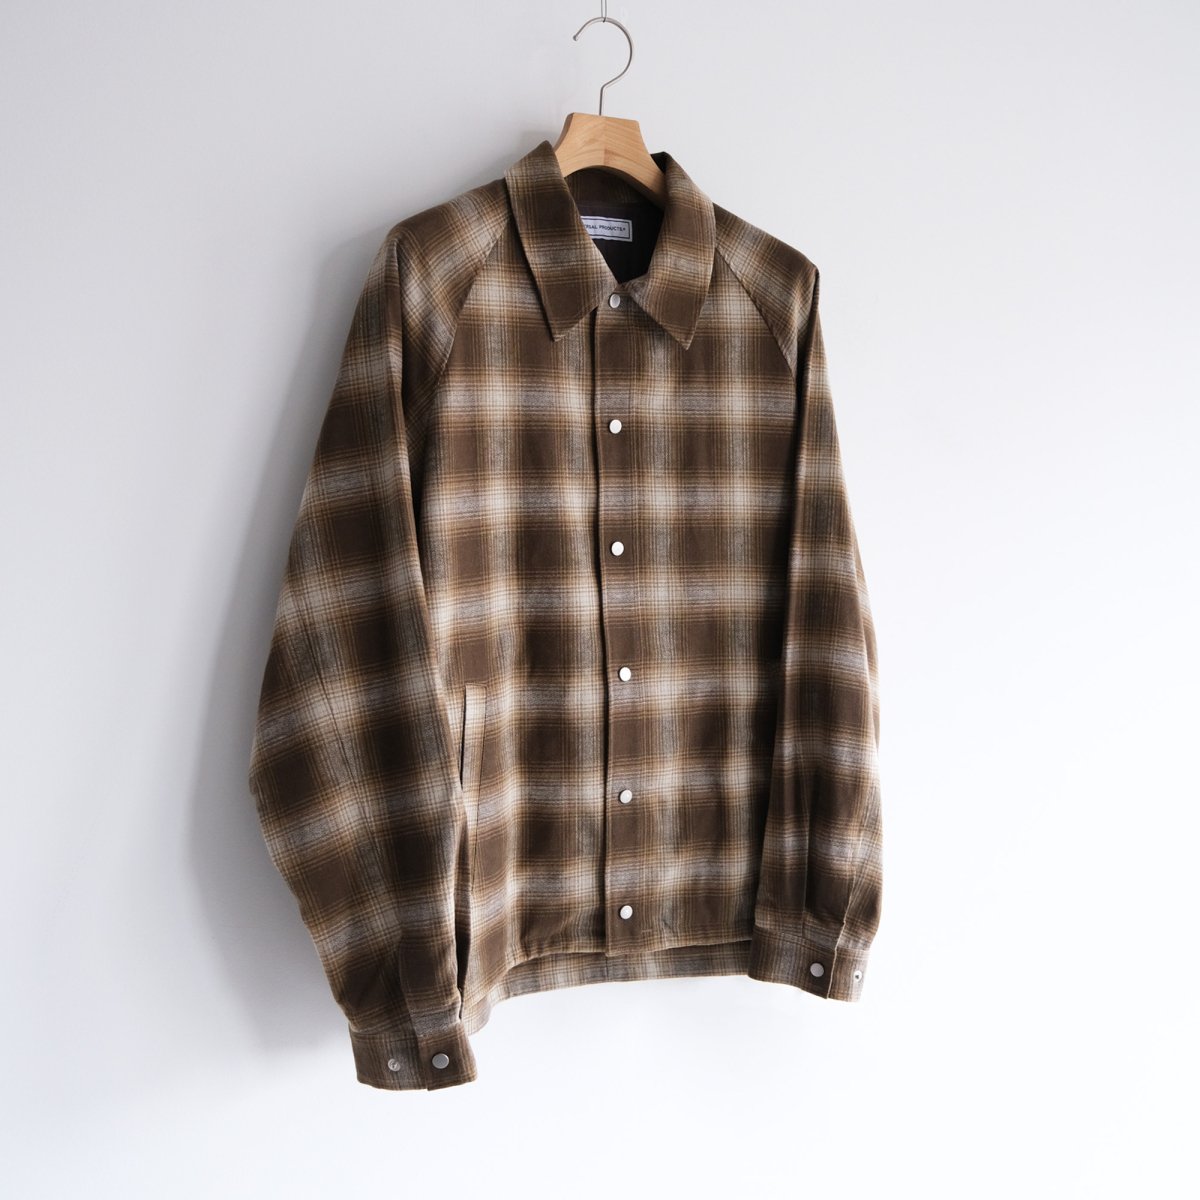 UNIVERSAL PRODUCTS『OMBRE CHECK JACKET』40%OFF 残り１点<img class='new_mark_img2' src='https://img.shop-pro.jp/img/new/icons20.gif' style='border:none;display:inline;margin:0px;padding:0px;width:auto;' />